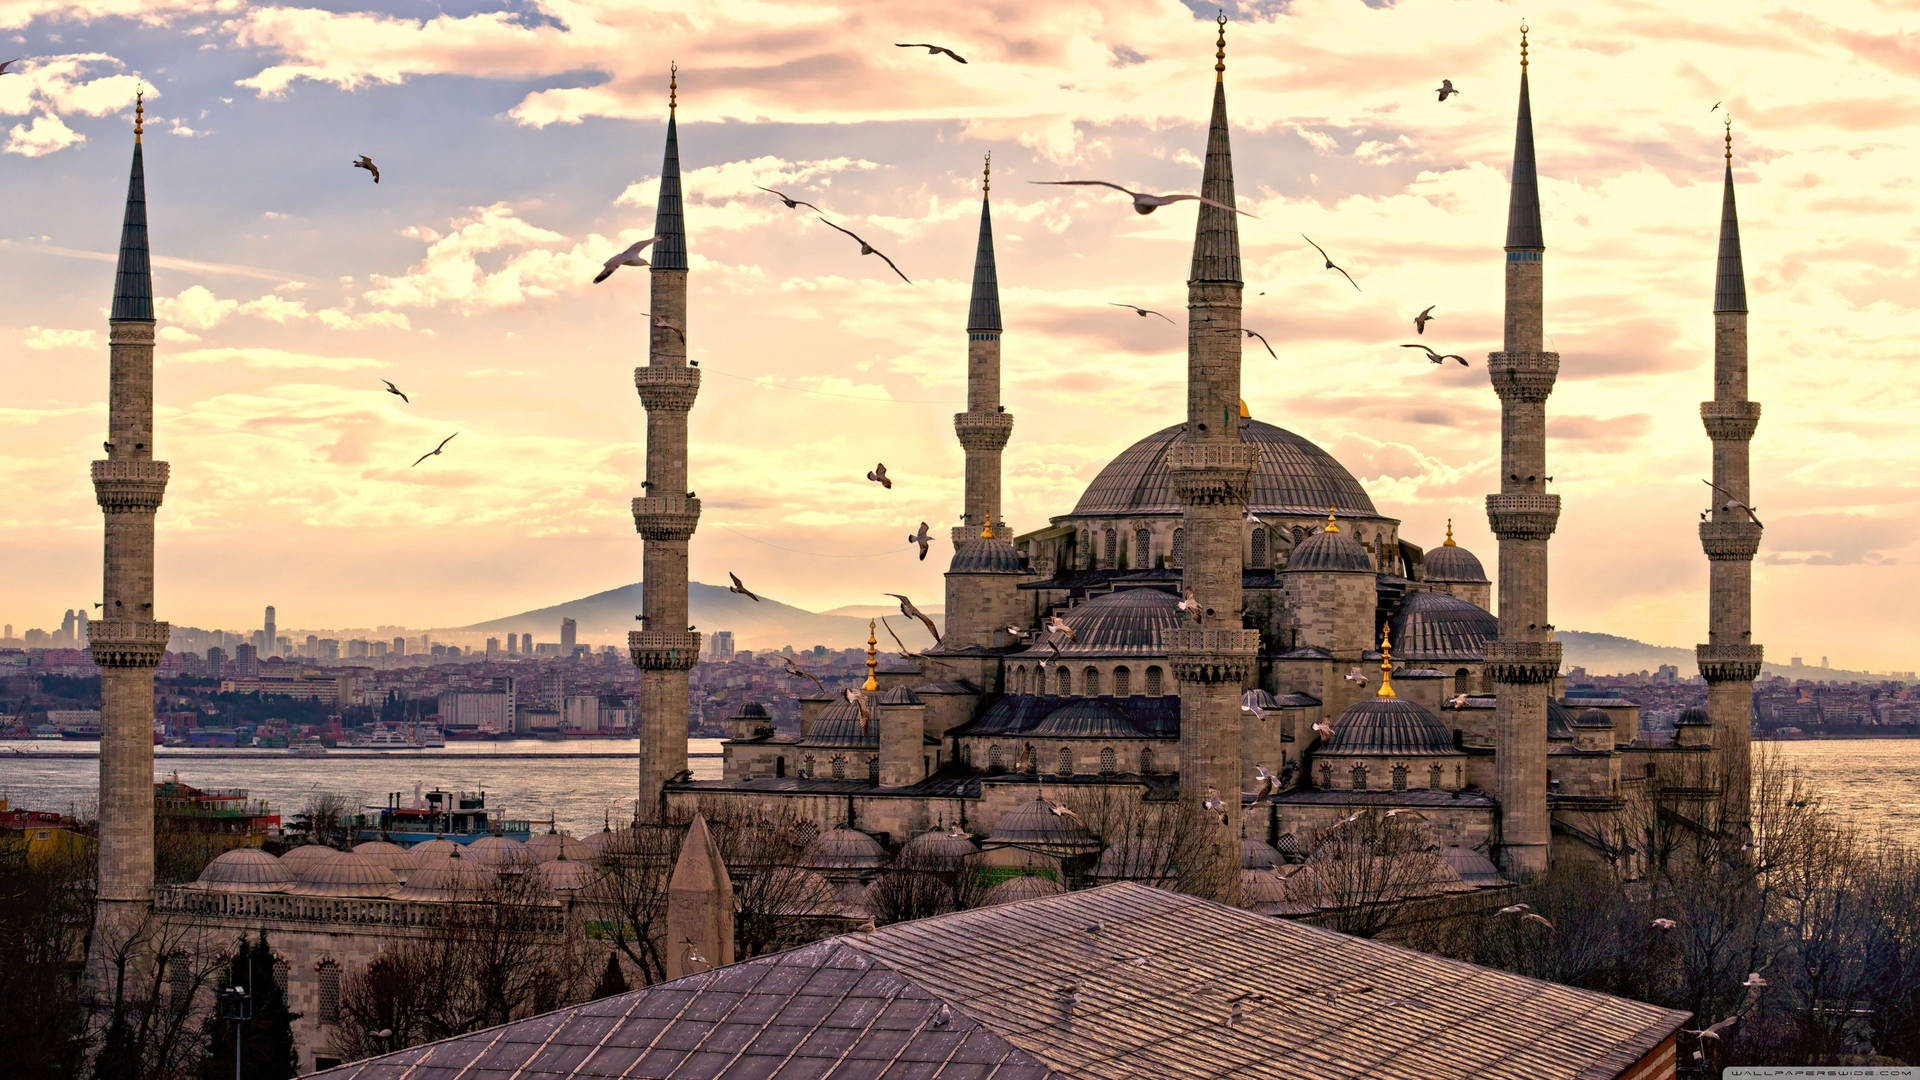 Istanbul's Sultan Ahmed Mosque in Turkey Wallpaper